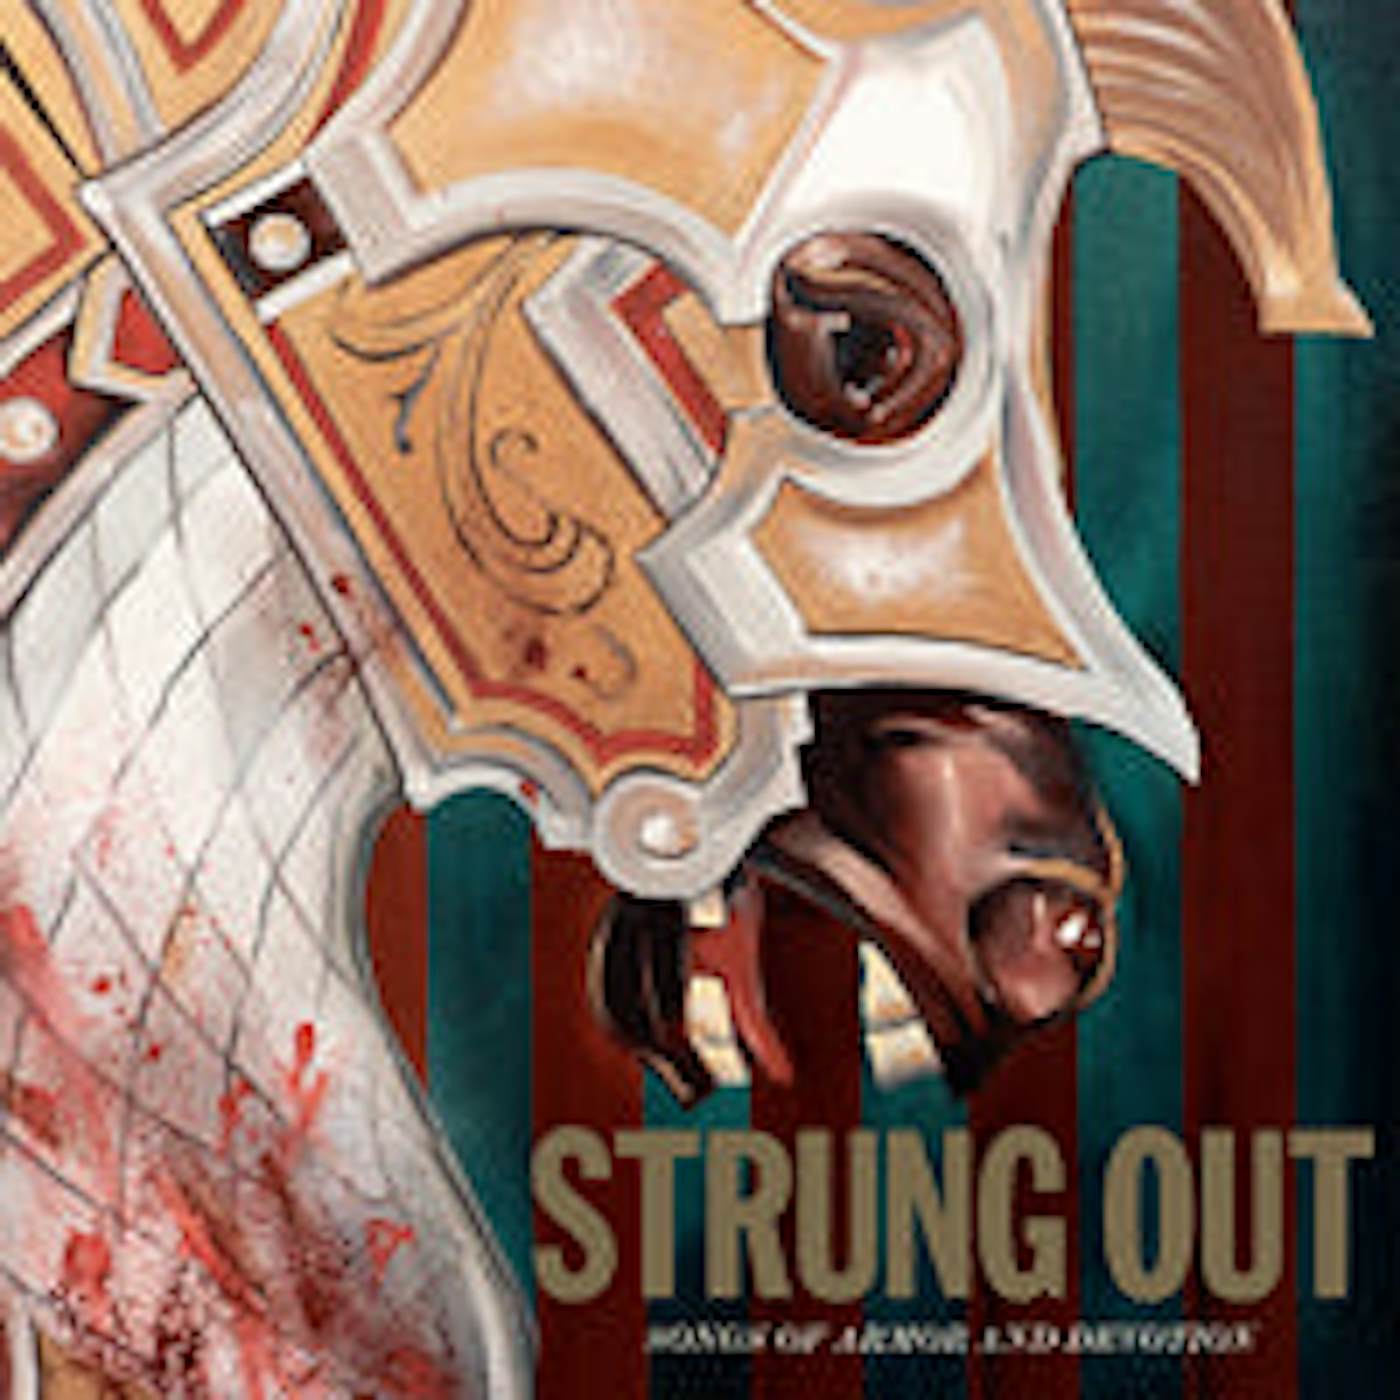 Strung Out LP - Songs Of Armor And Devotion (Vinyl)